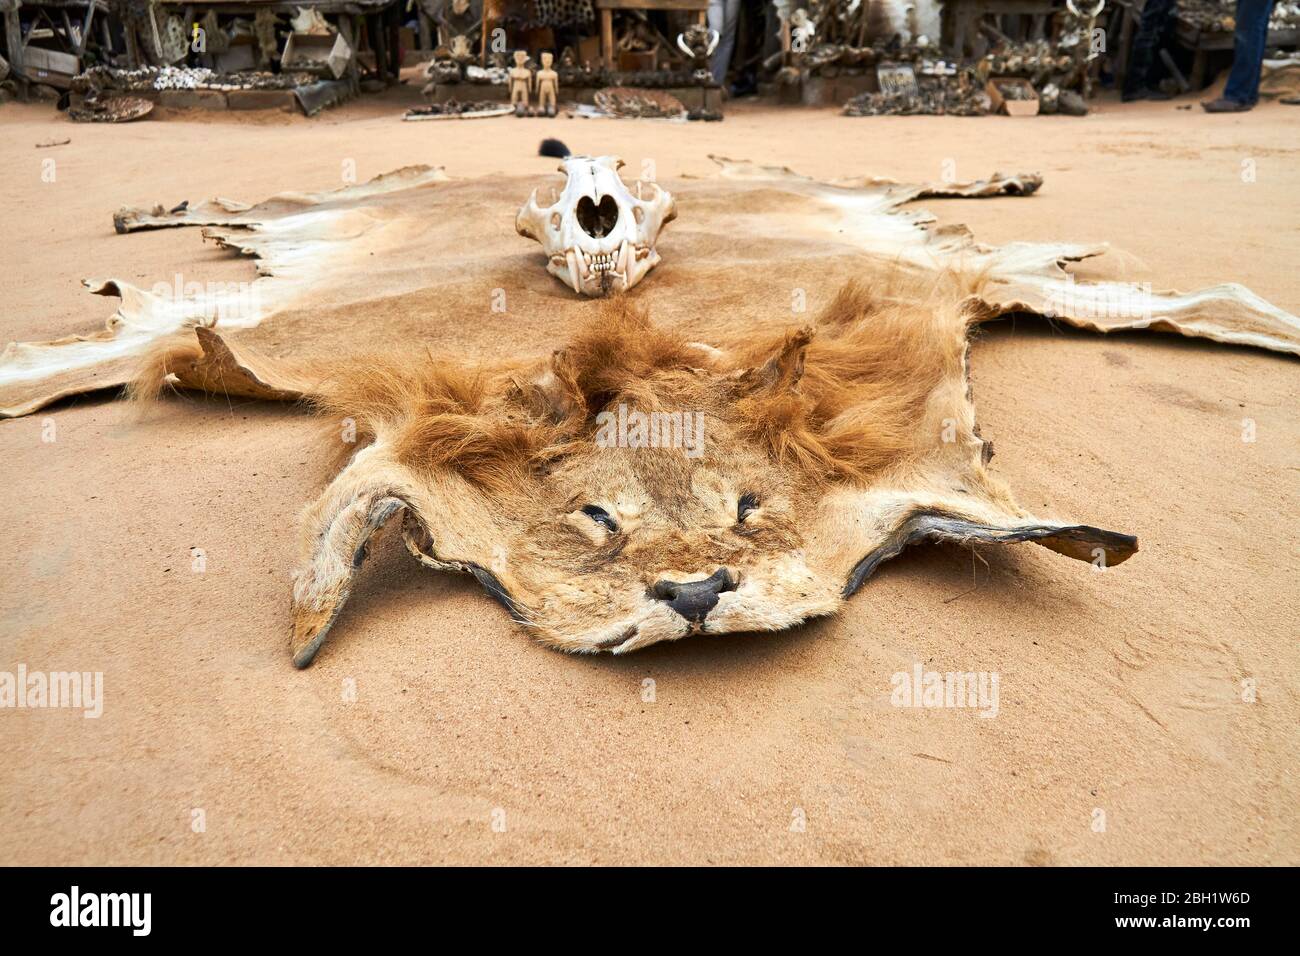 Togo, Lome, Lion hide lying on sand Stock Photo